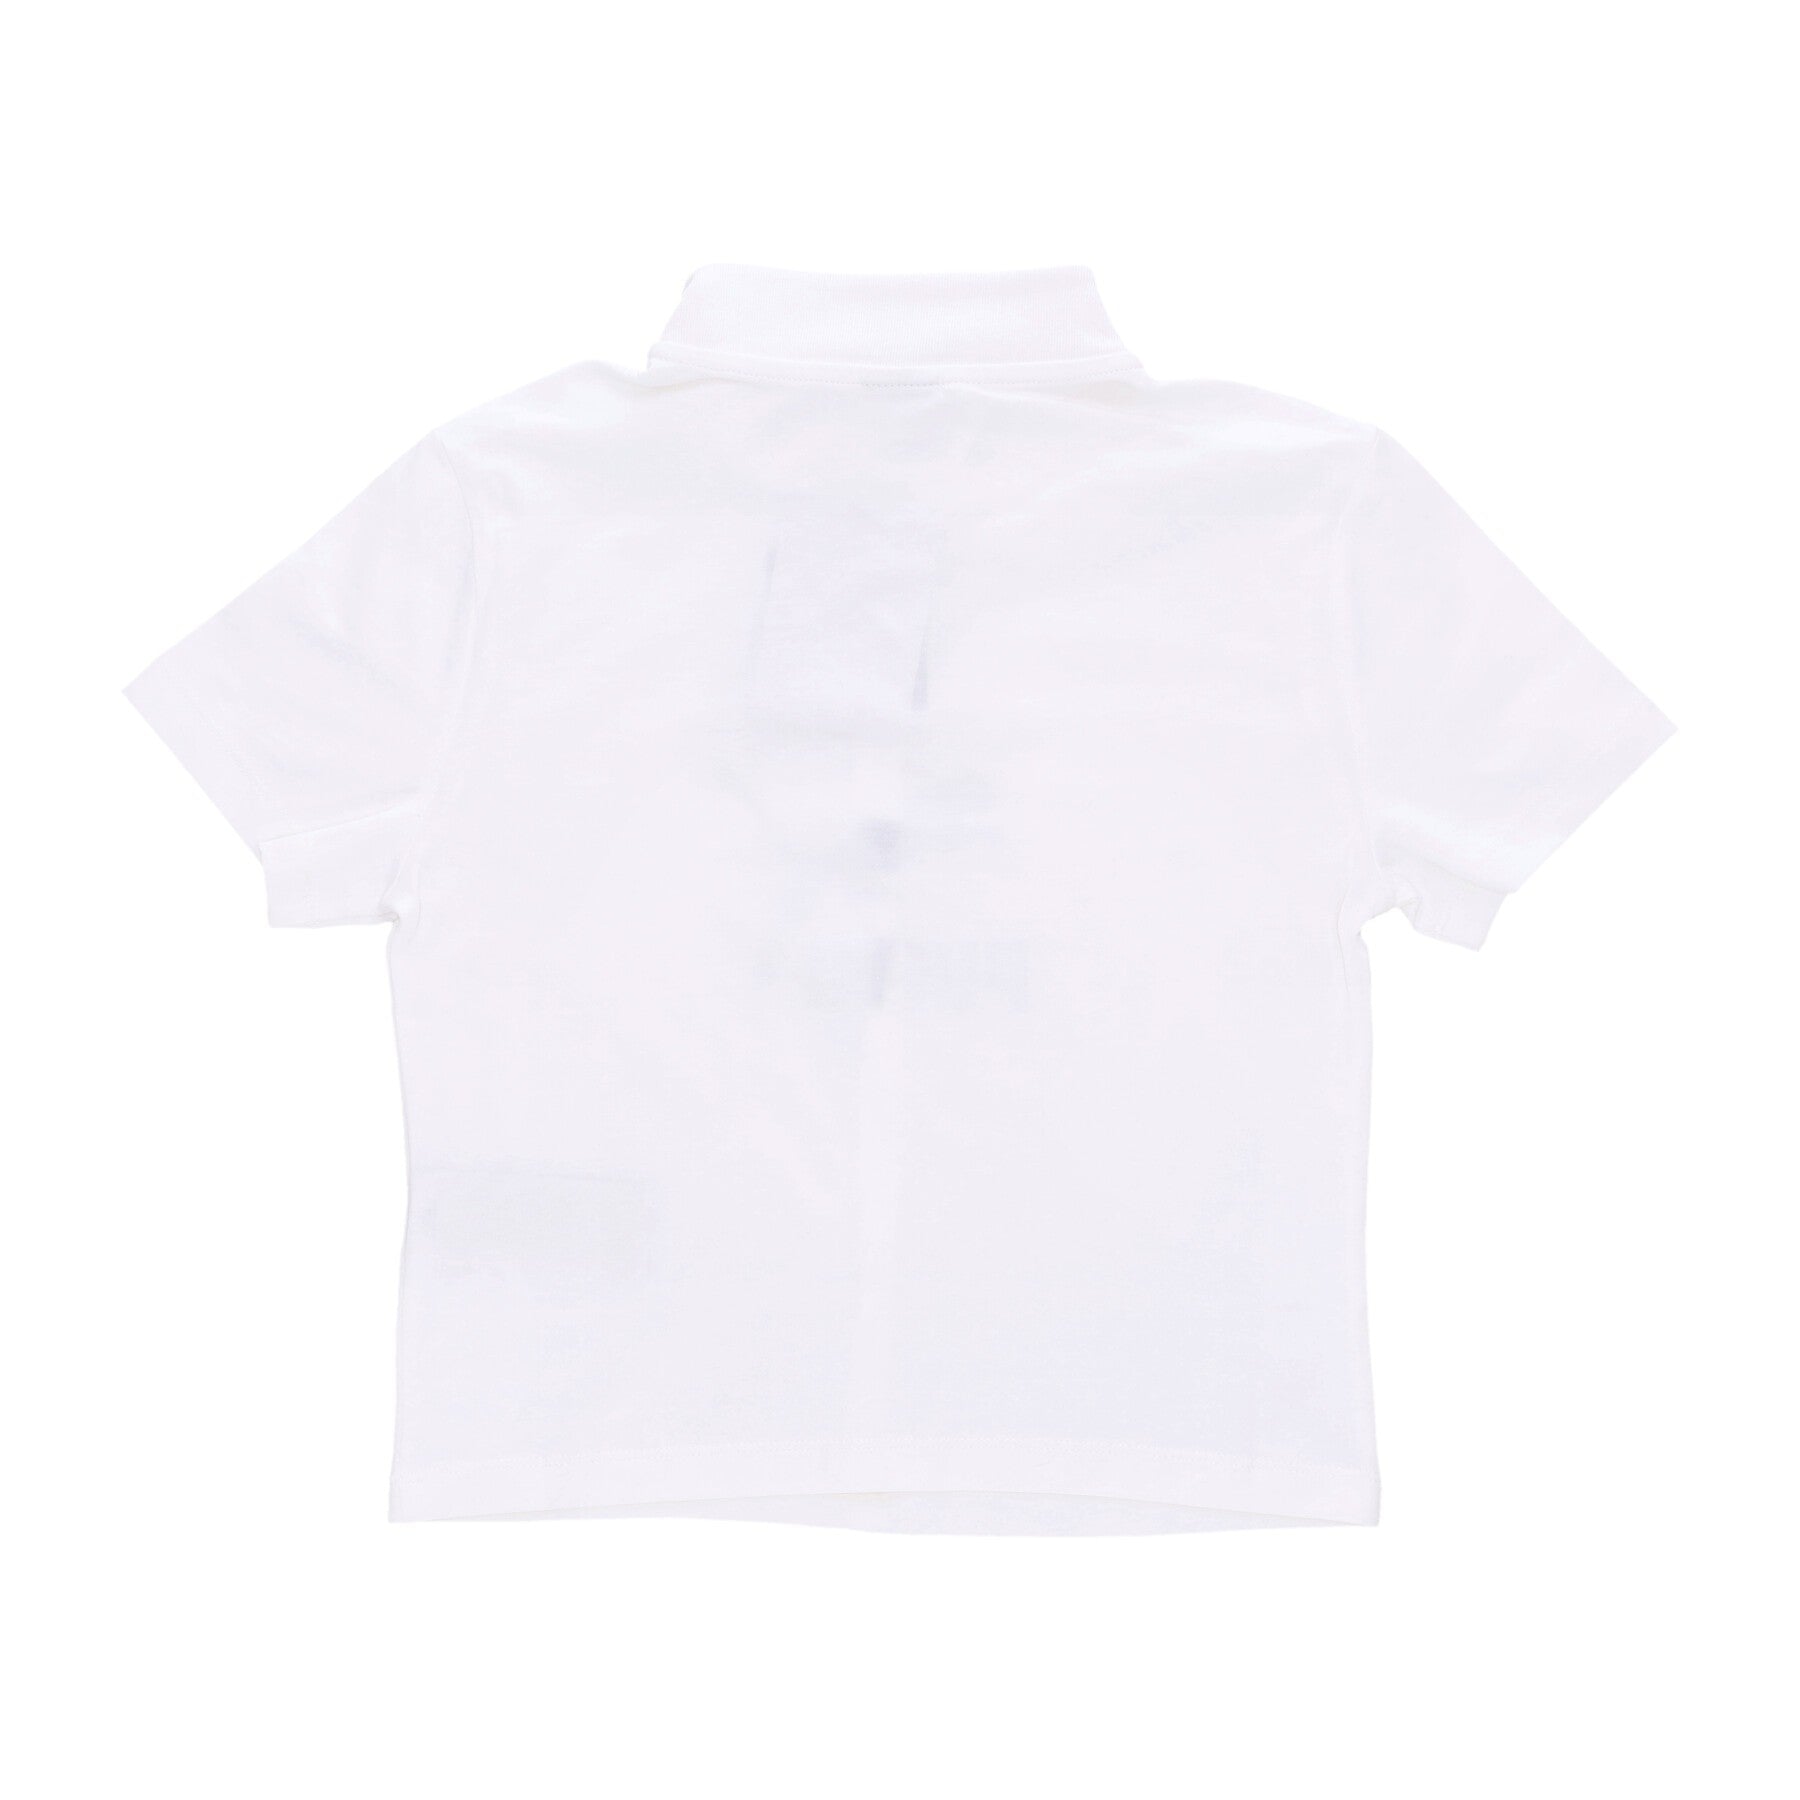 Classics Archive Rem Tee White Women's Short Sleeve Polo